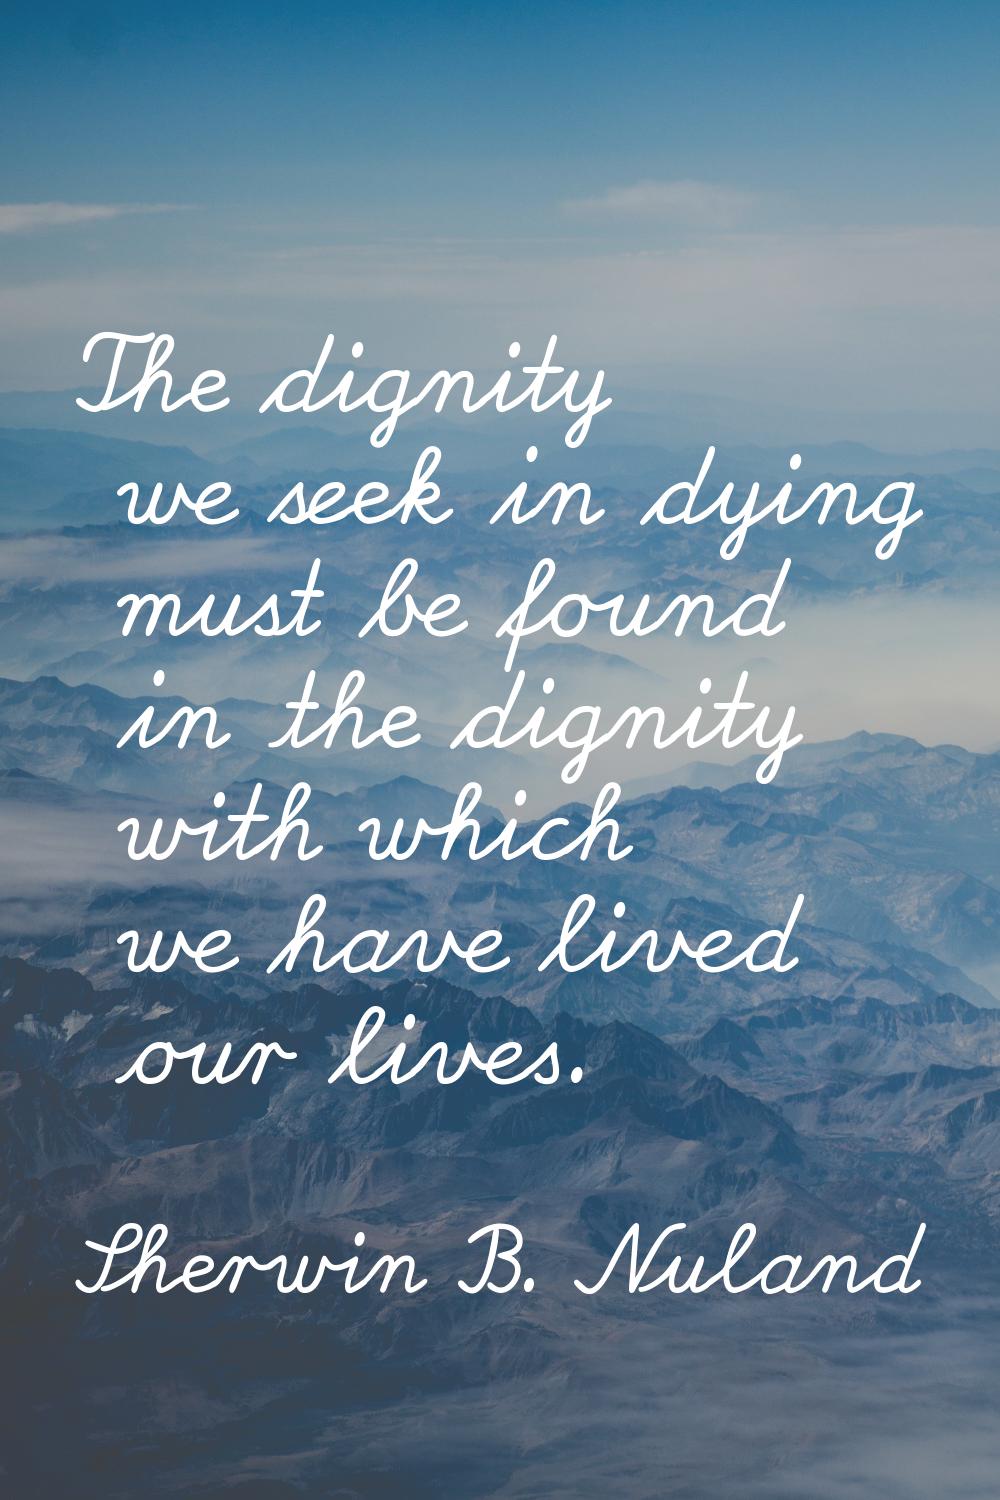 The dignity we seek in dying must be found in the dignity with which we have lived our lives.